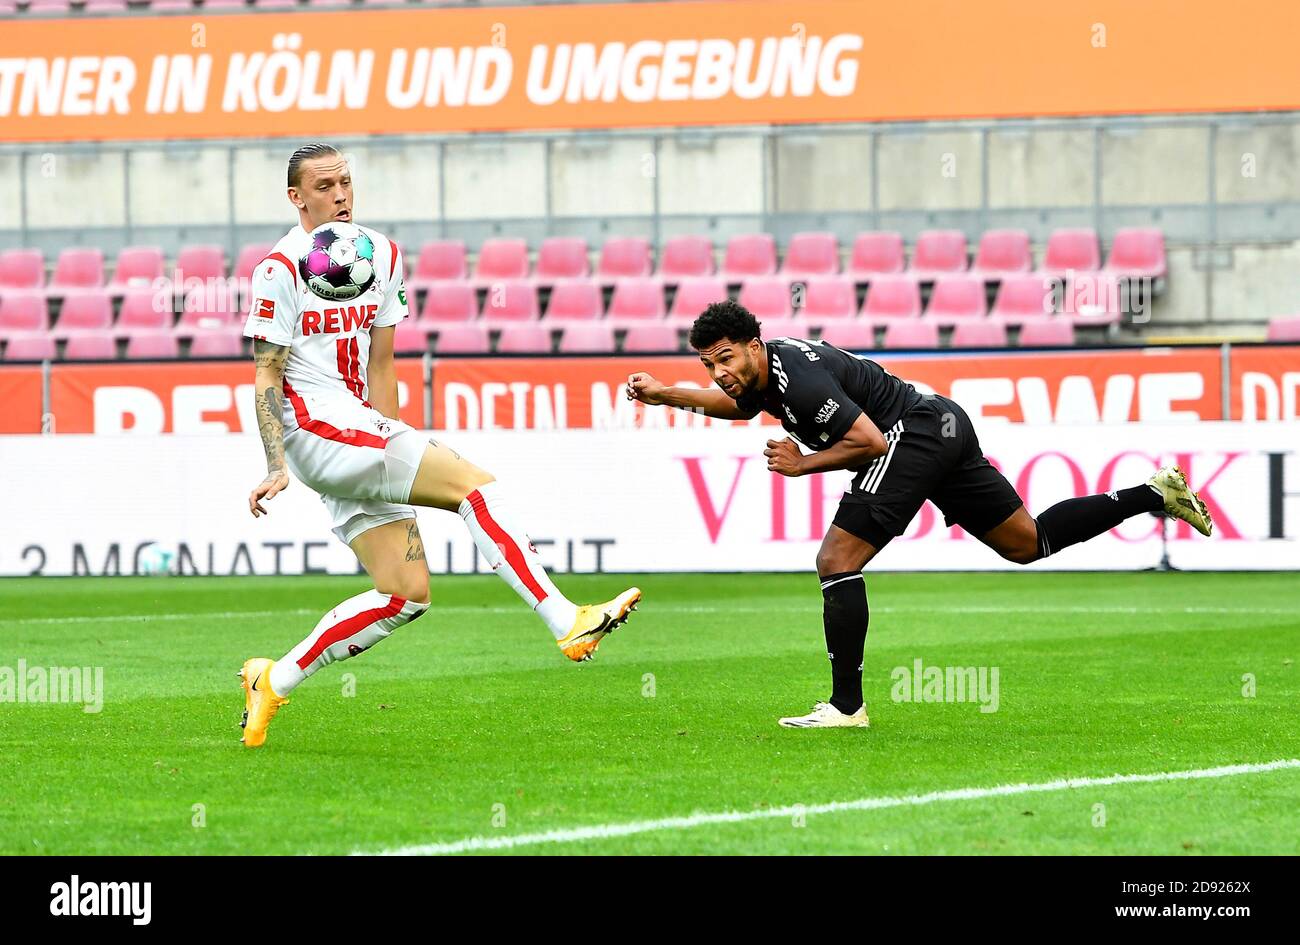 Handball by Marius WOLF (K) in the penalty area, after a header from Serge GNABRY r. (M), scene for the hand penalty, action, hand, soccer 1st Bundesliga, 6th matchday, FC Cologne (K) - FC Bayern Munich (M), on October 31, 2020 in Koeln/Germany. Photo: Elmar Kremser/Sven Simon/Pool # DFL regulations prohibit any use of photographs as image sequences and/or quasi-video # # Editorial use only # # National and international News- Agencies OUT # ¬ | usage worldwide Stock Photo